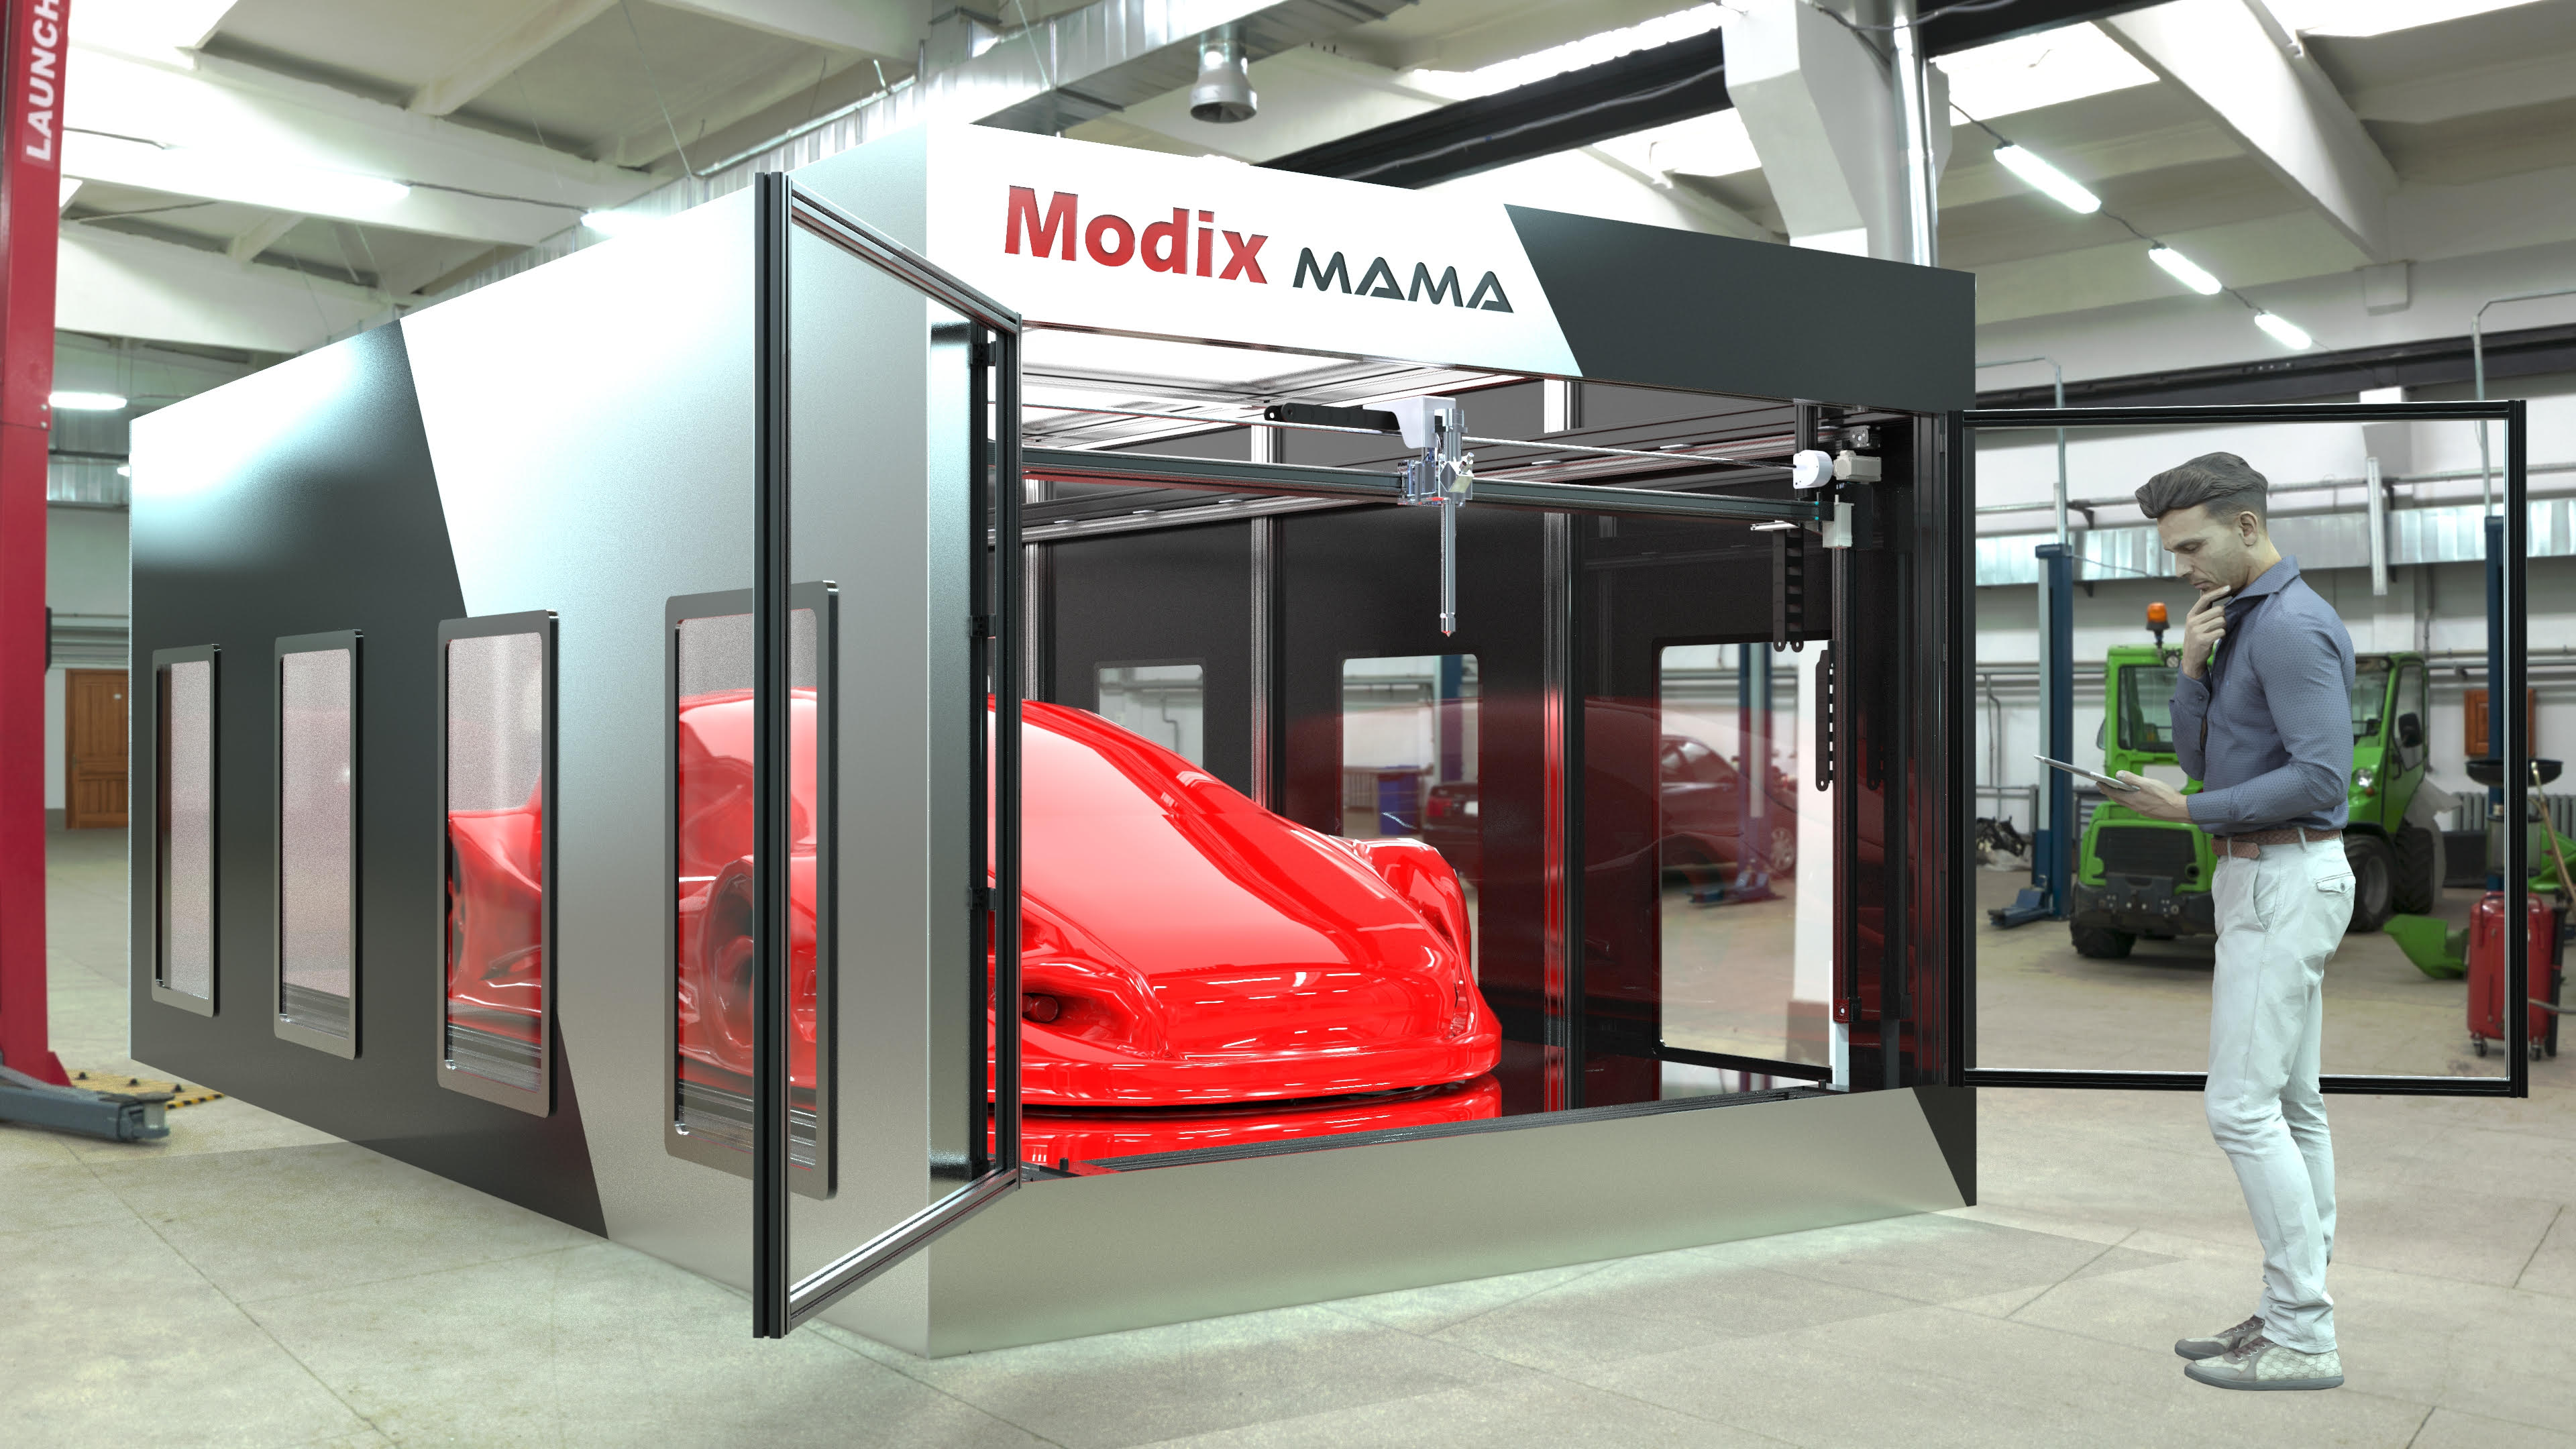 Modix launches extra large MAMA 3D printer, capable of making parts up to 5m tall 3D Printing